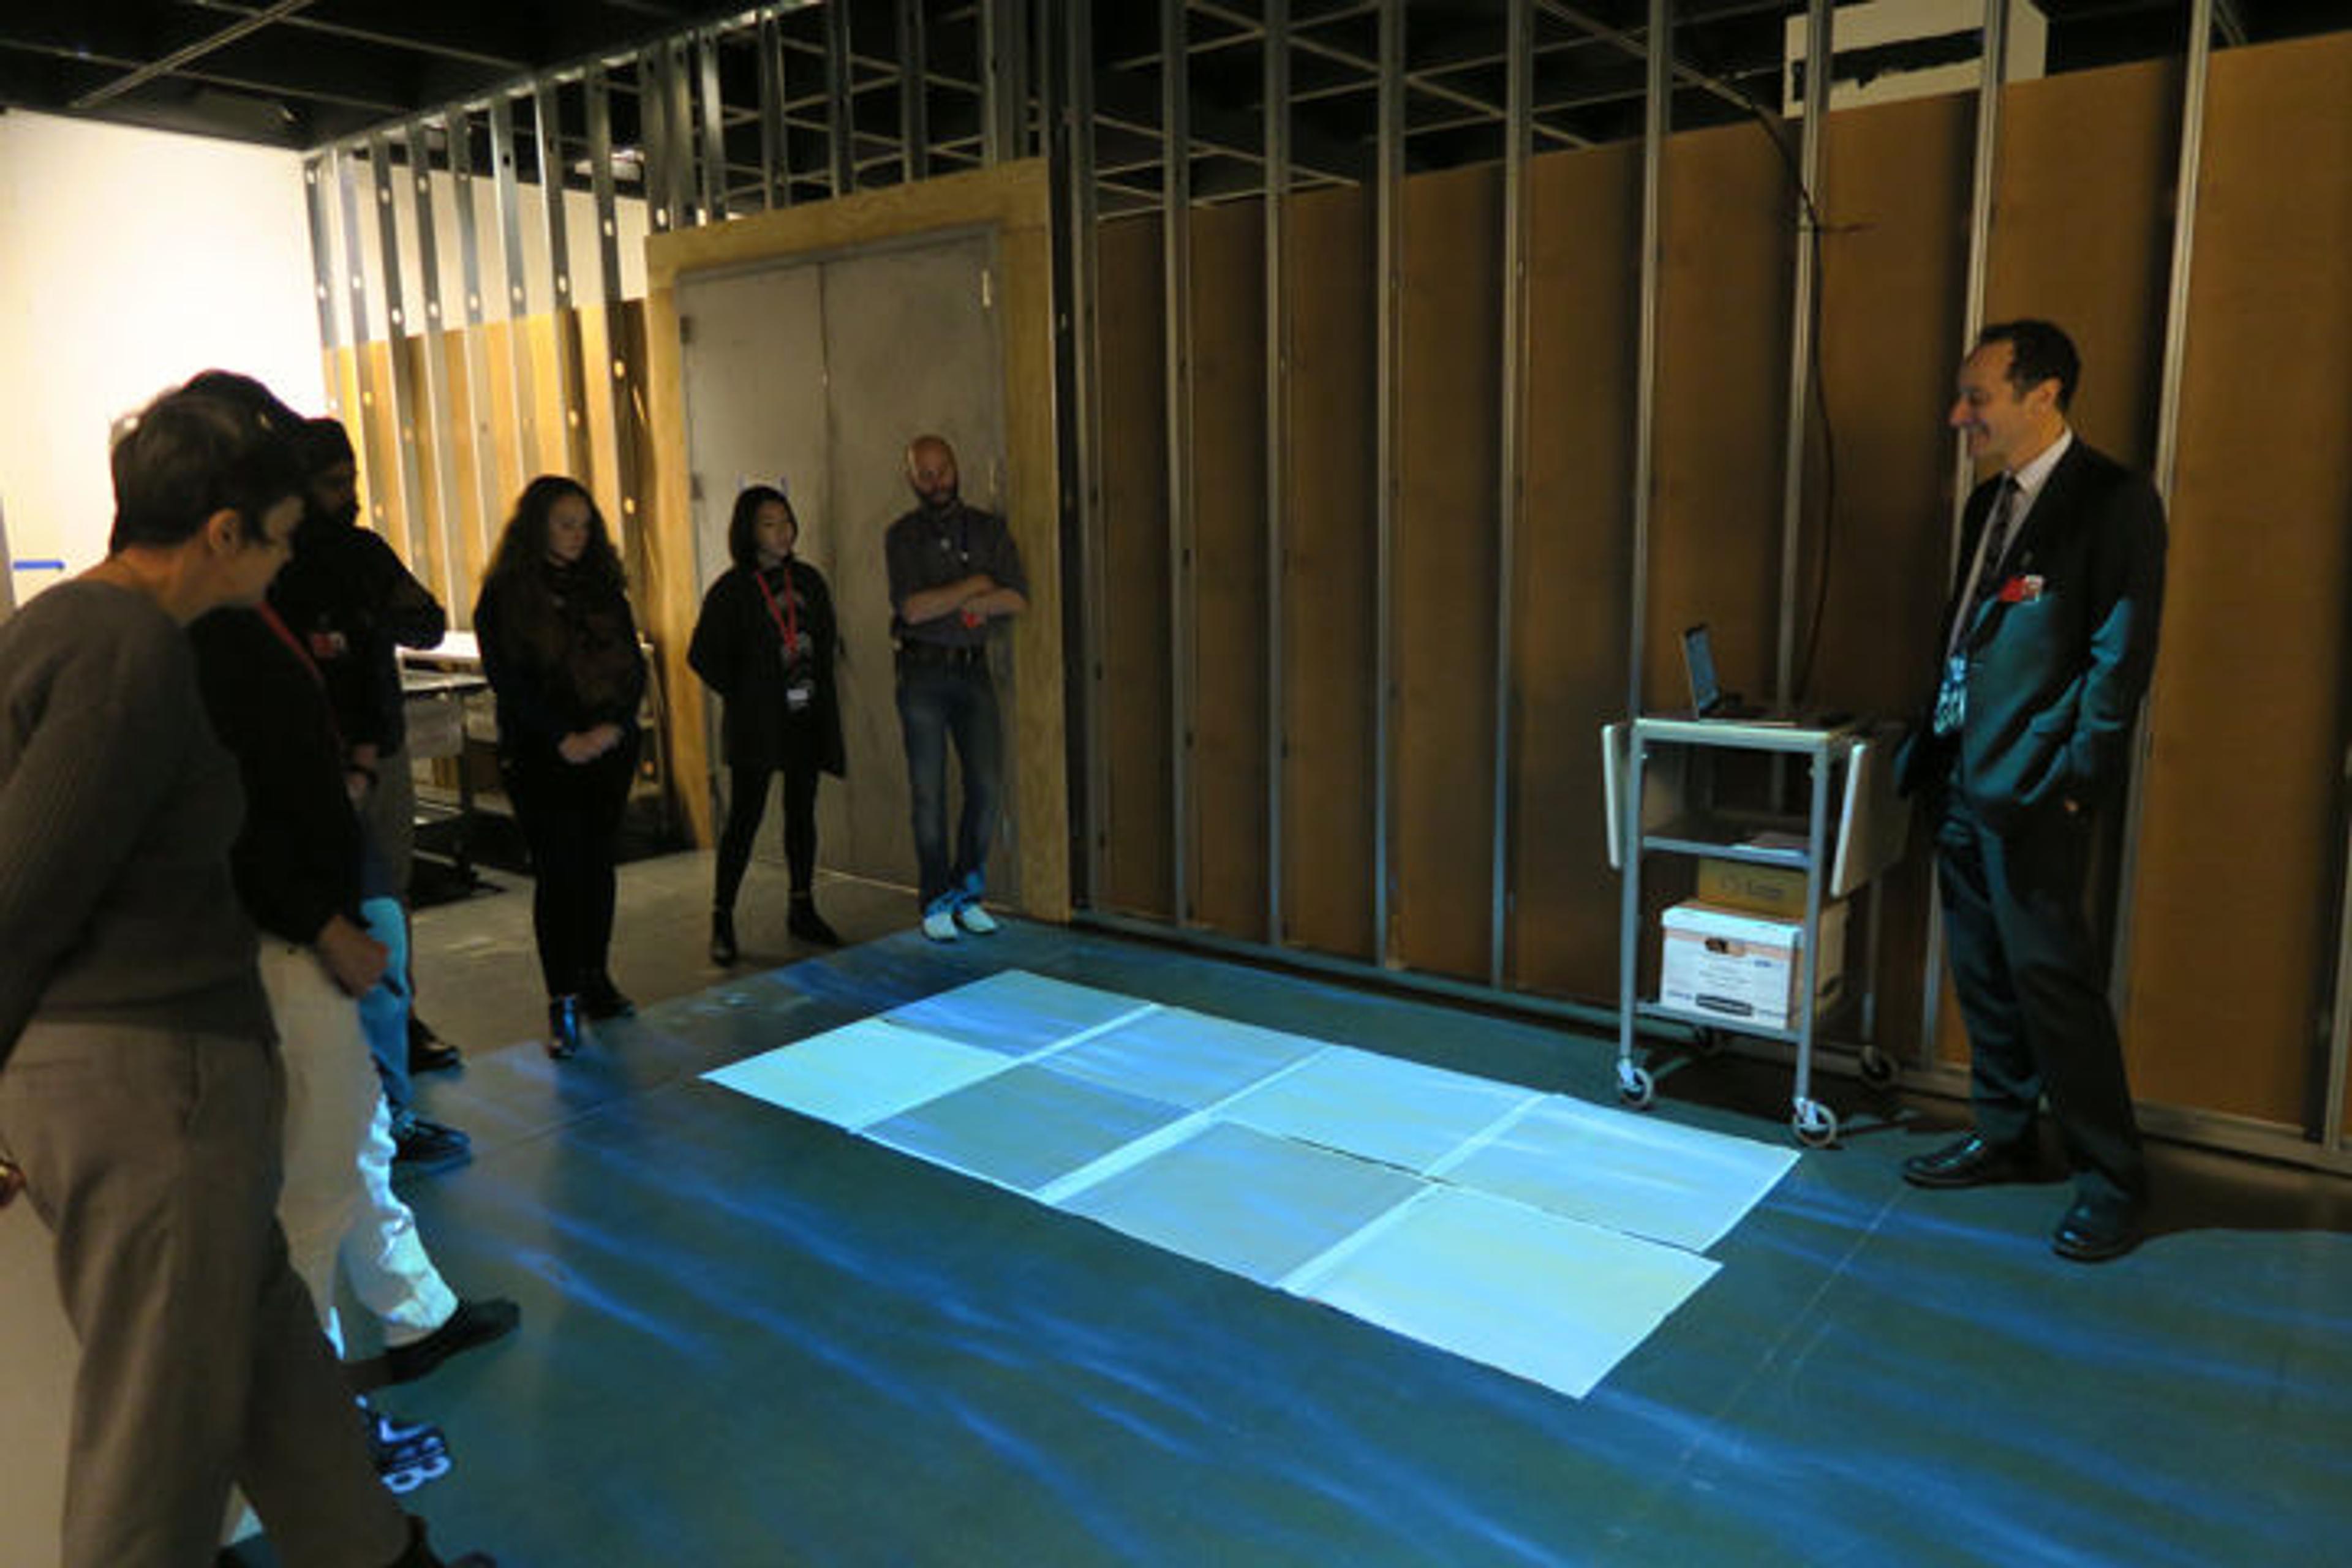 A group of Met staff members view a digital projection in an empty exhibition gallery